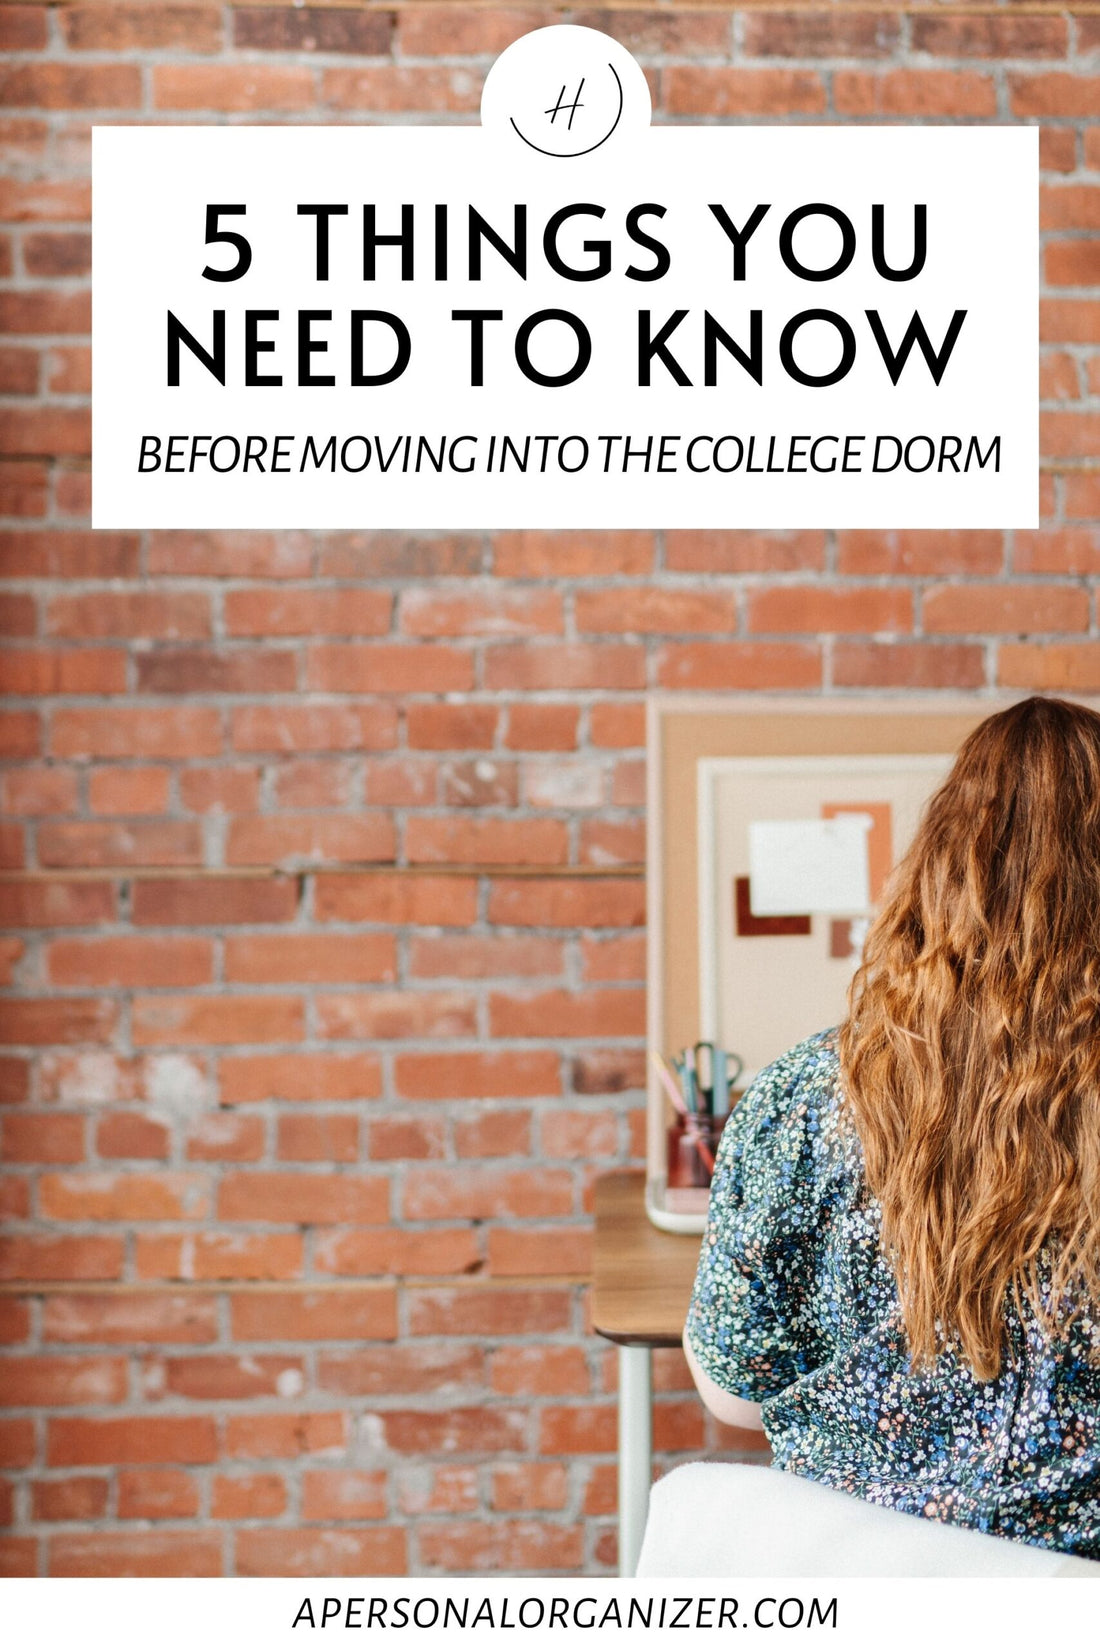 5 Things You Need to Know Before You Move Into The College Dorm